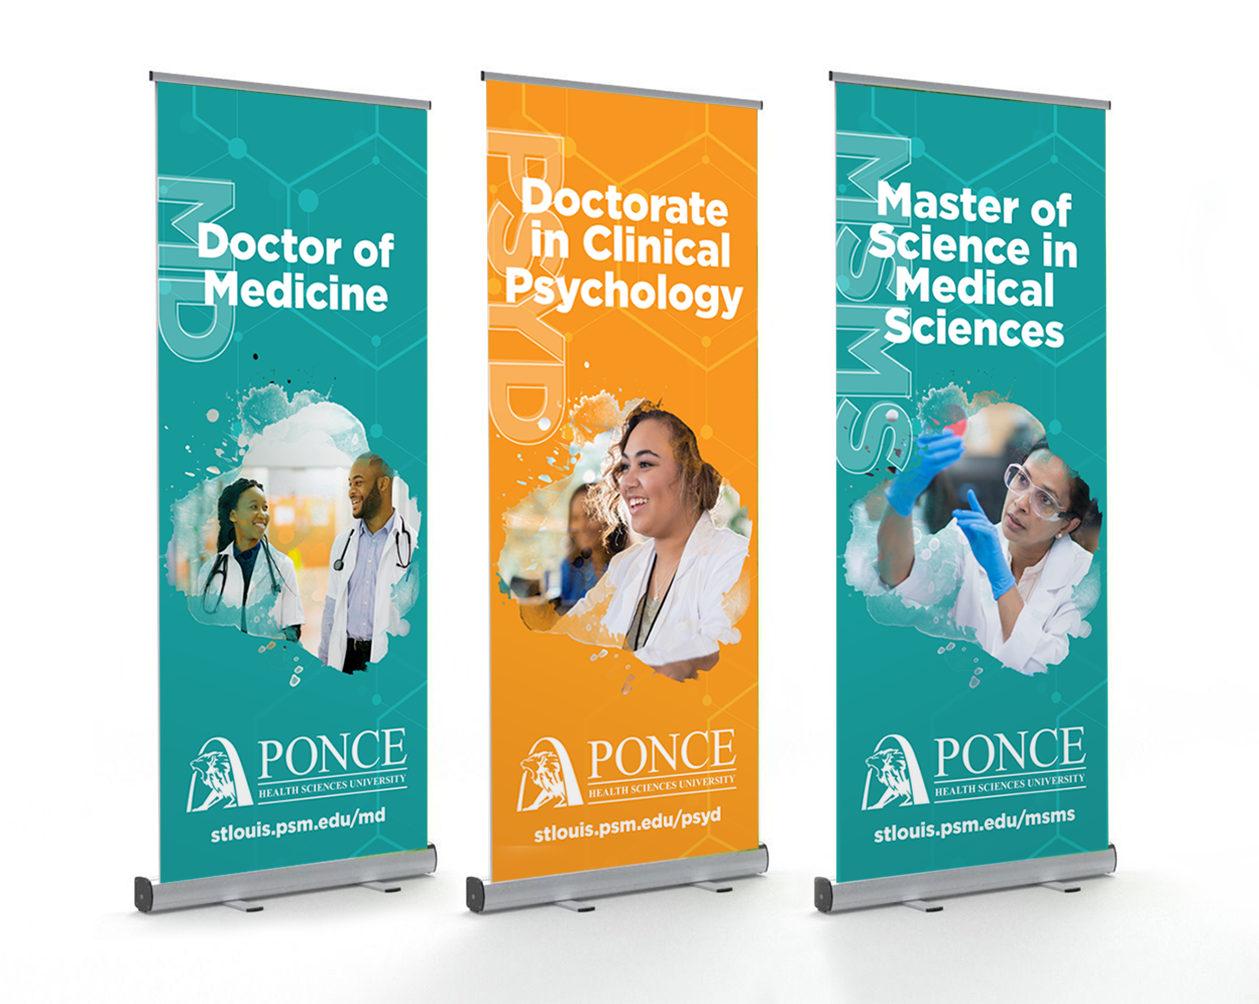 Ponce Rollup banners